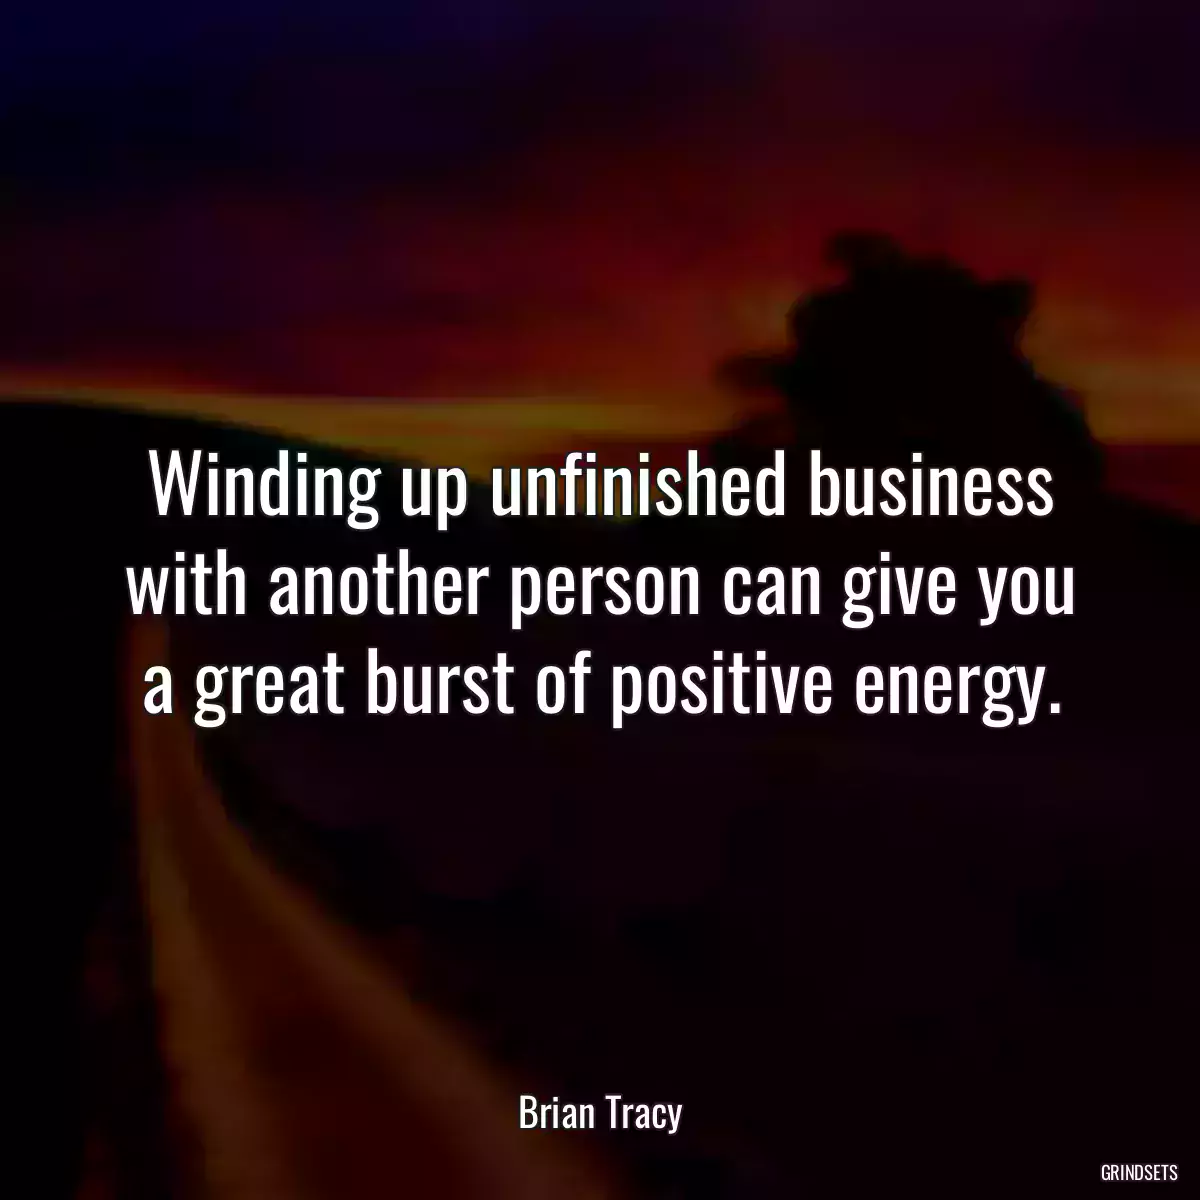 Winding up unfinished business with another person can give you a great burst of positive energy.